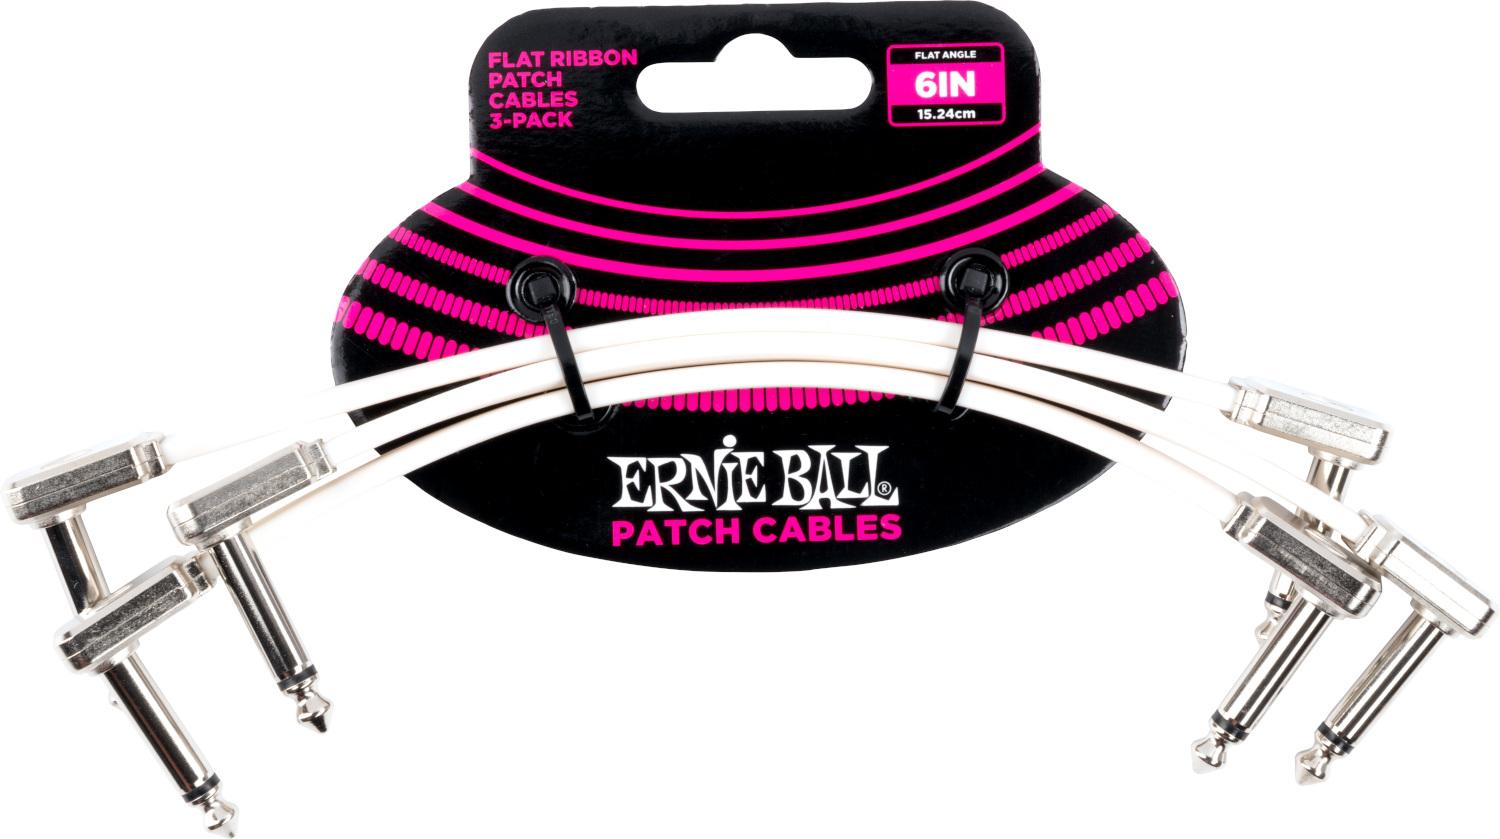 Ernie Ball 6385 6in Flat Ribbon Patch Cable White 3 Pack White